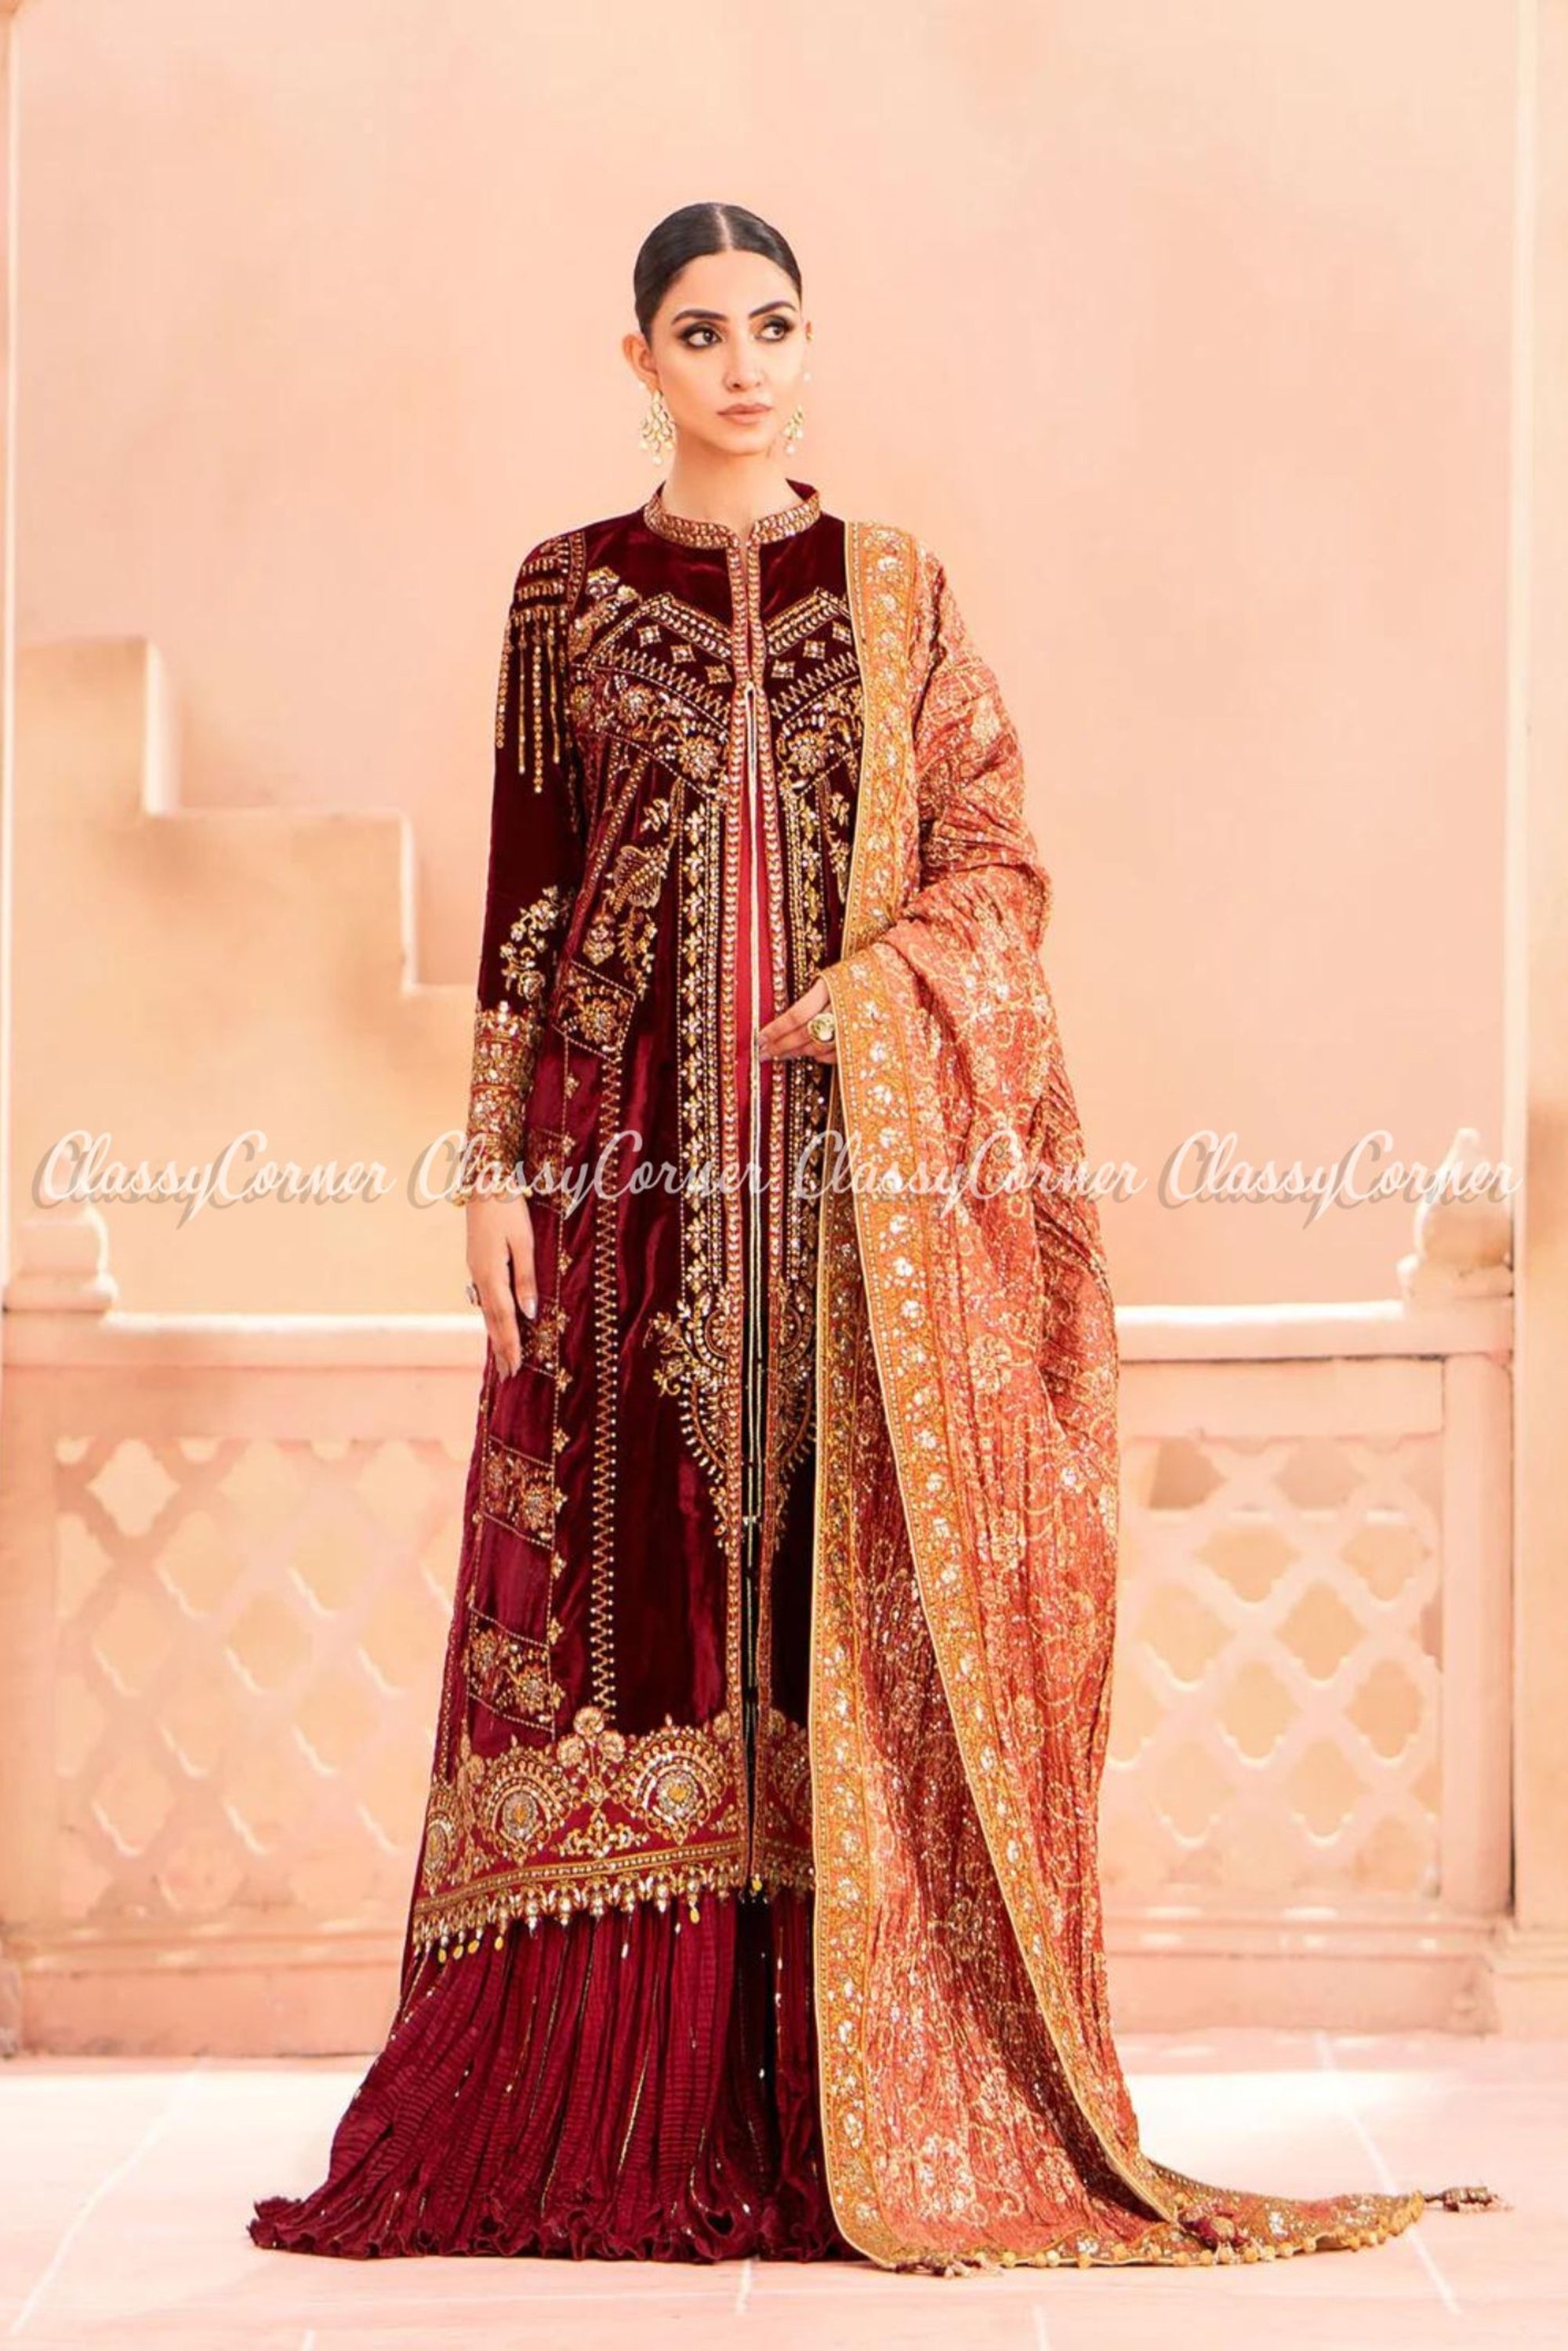 Pakistani guest wedding outfits